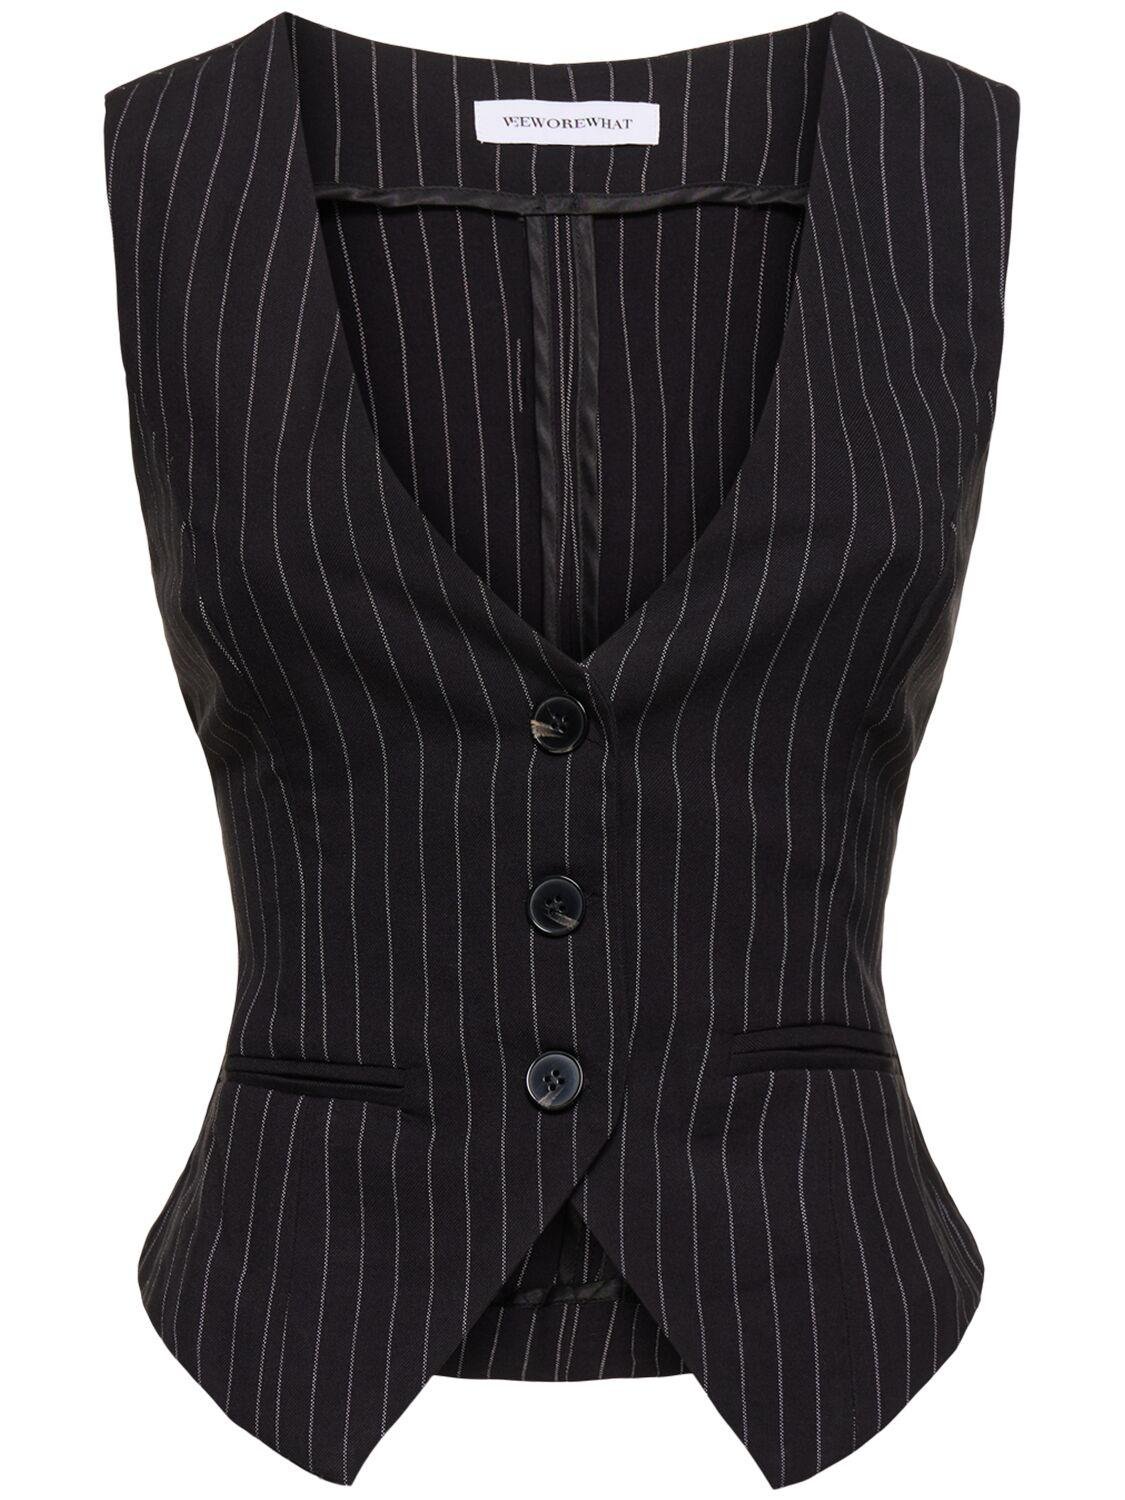 Pinstriped Tailored Twill Vest by WEWOREWHAT